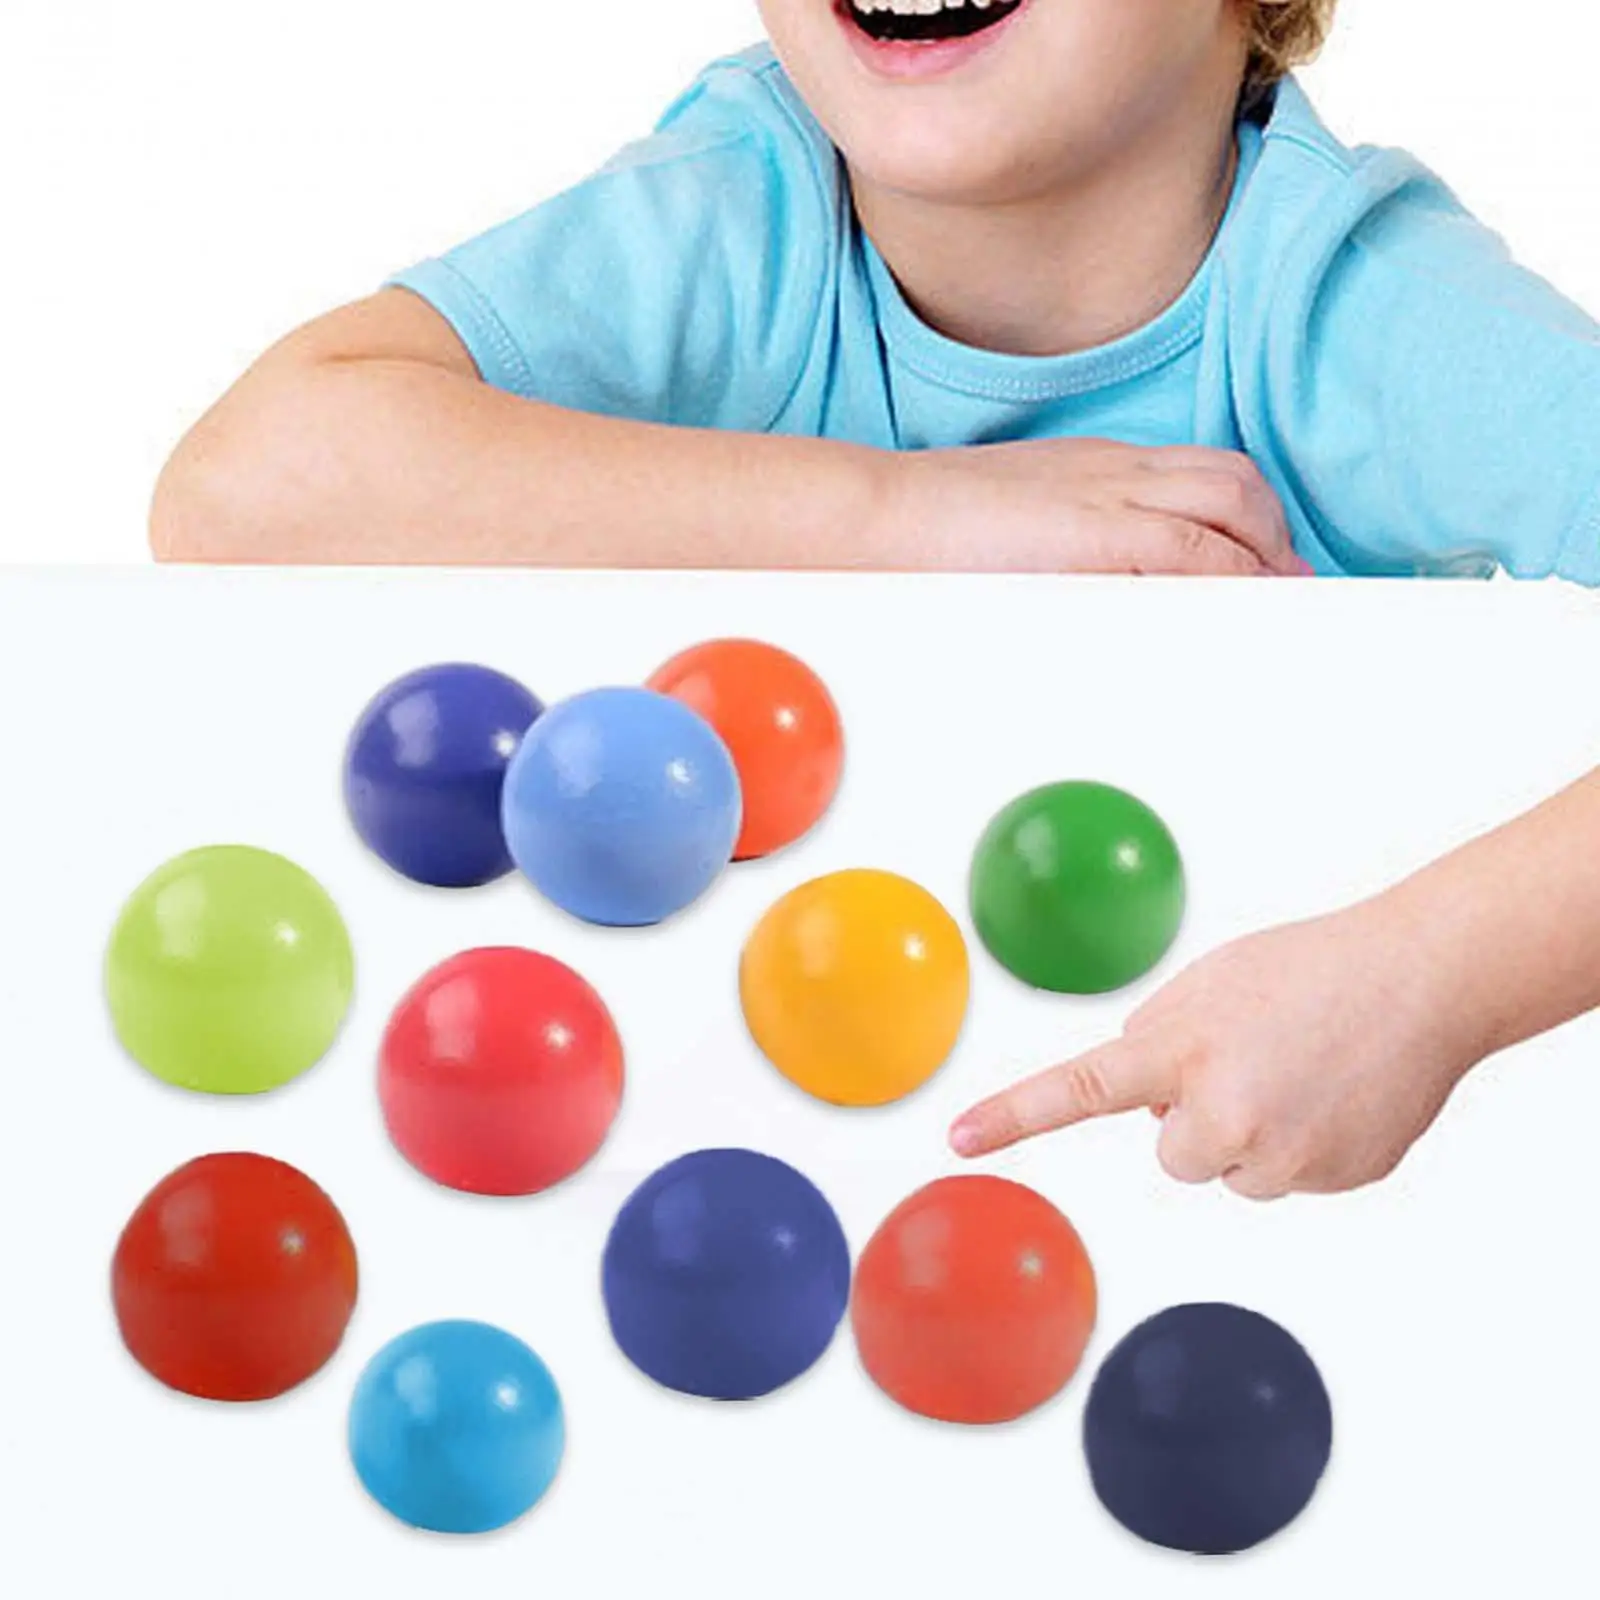 12x Montessori Multicolored Ball Set Birthday Gifts Ball Educational Counting Toy for Girls Age 3 4 5 6 Children